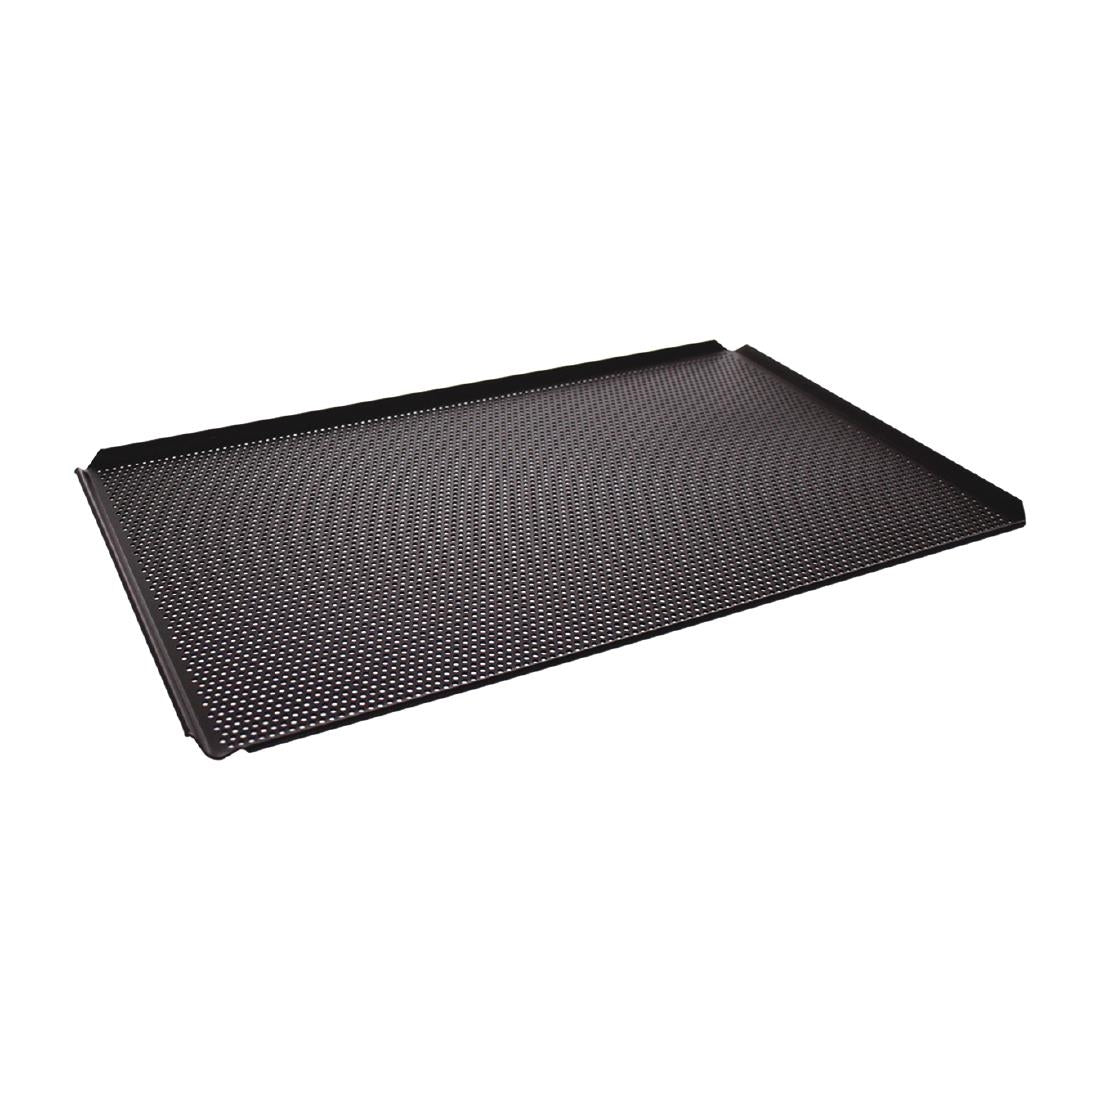 DW284 Schneider Tyneck Non-Stick Perforated Baking Tray 530 x 325mm